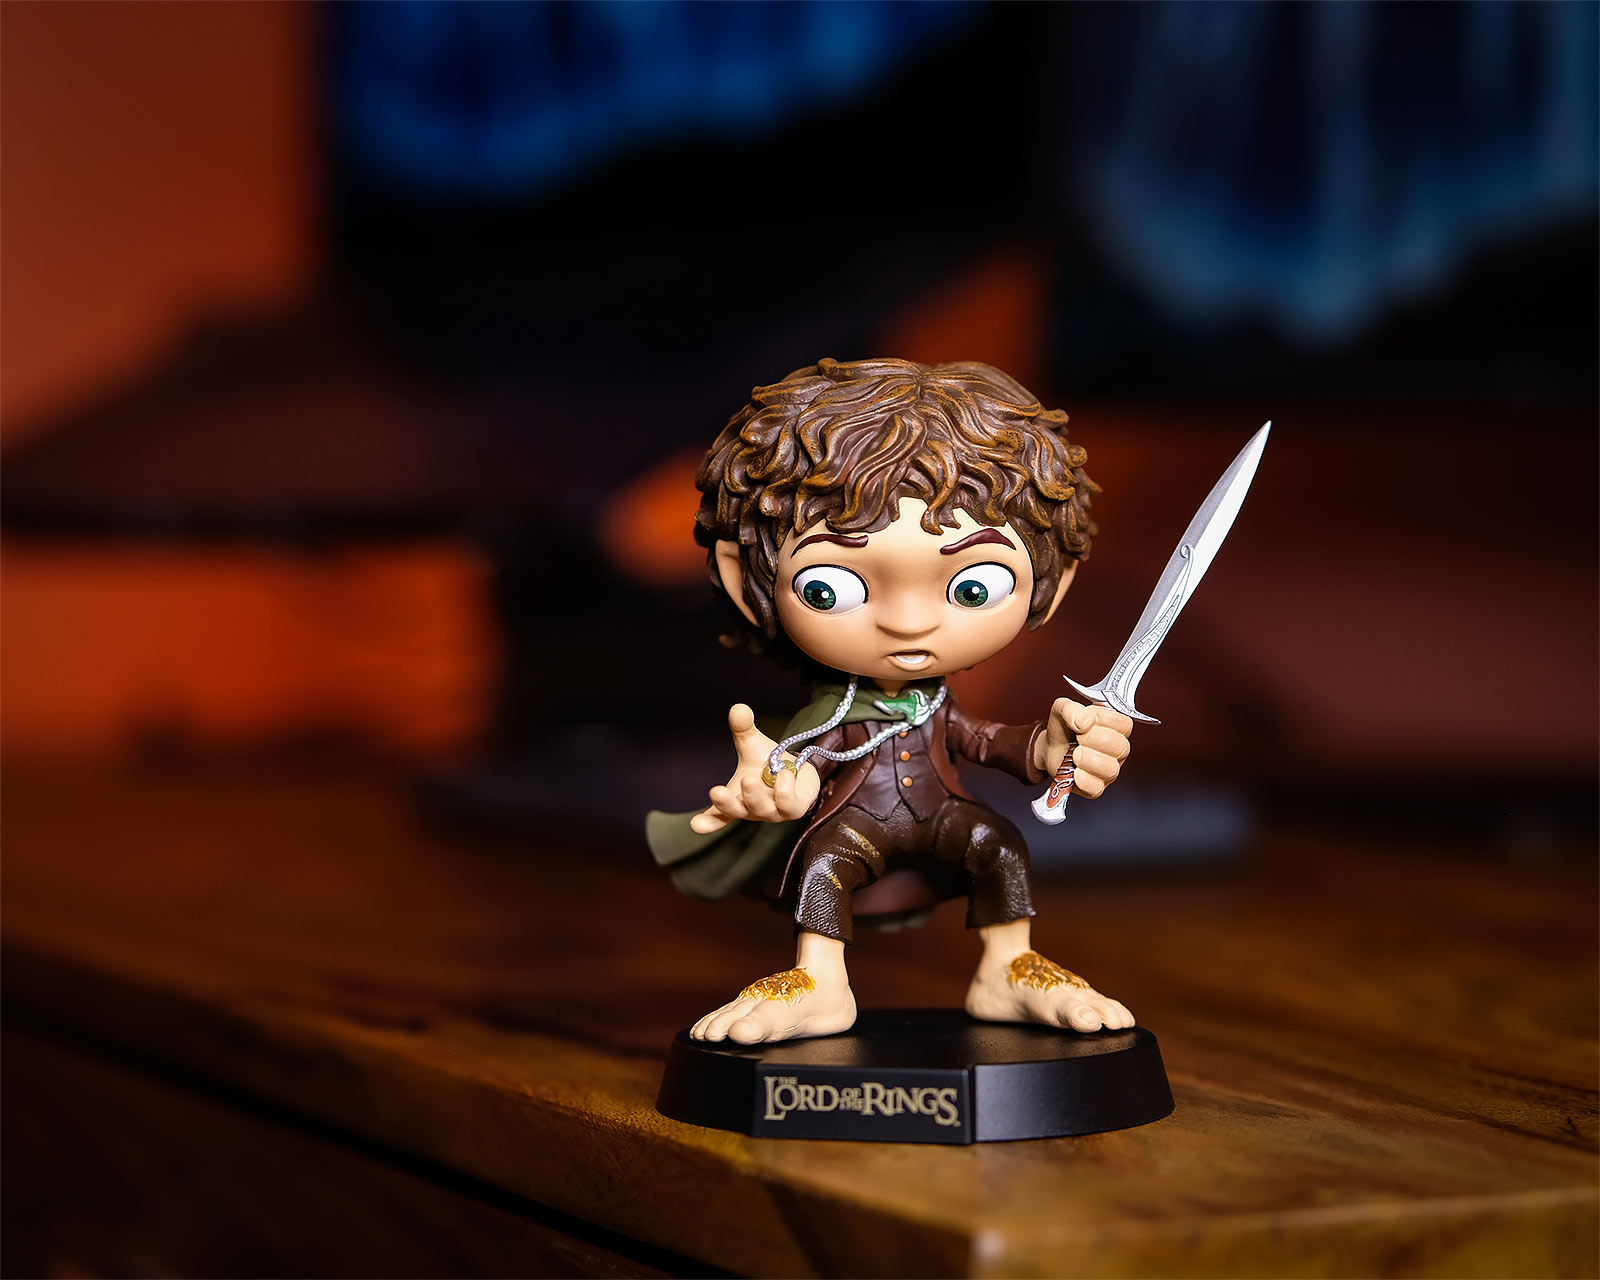 Lord of the Rings - Frodo Minico figure